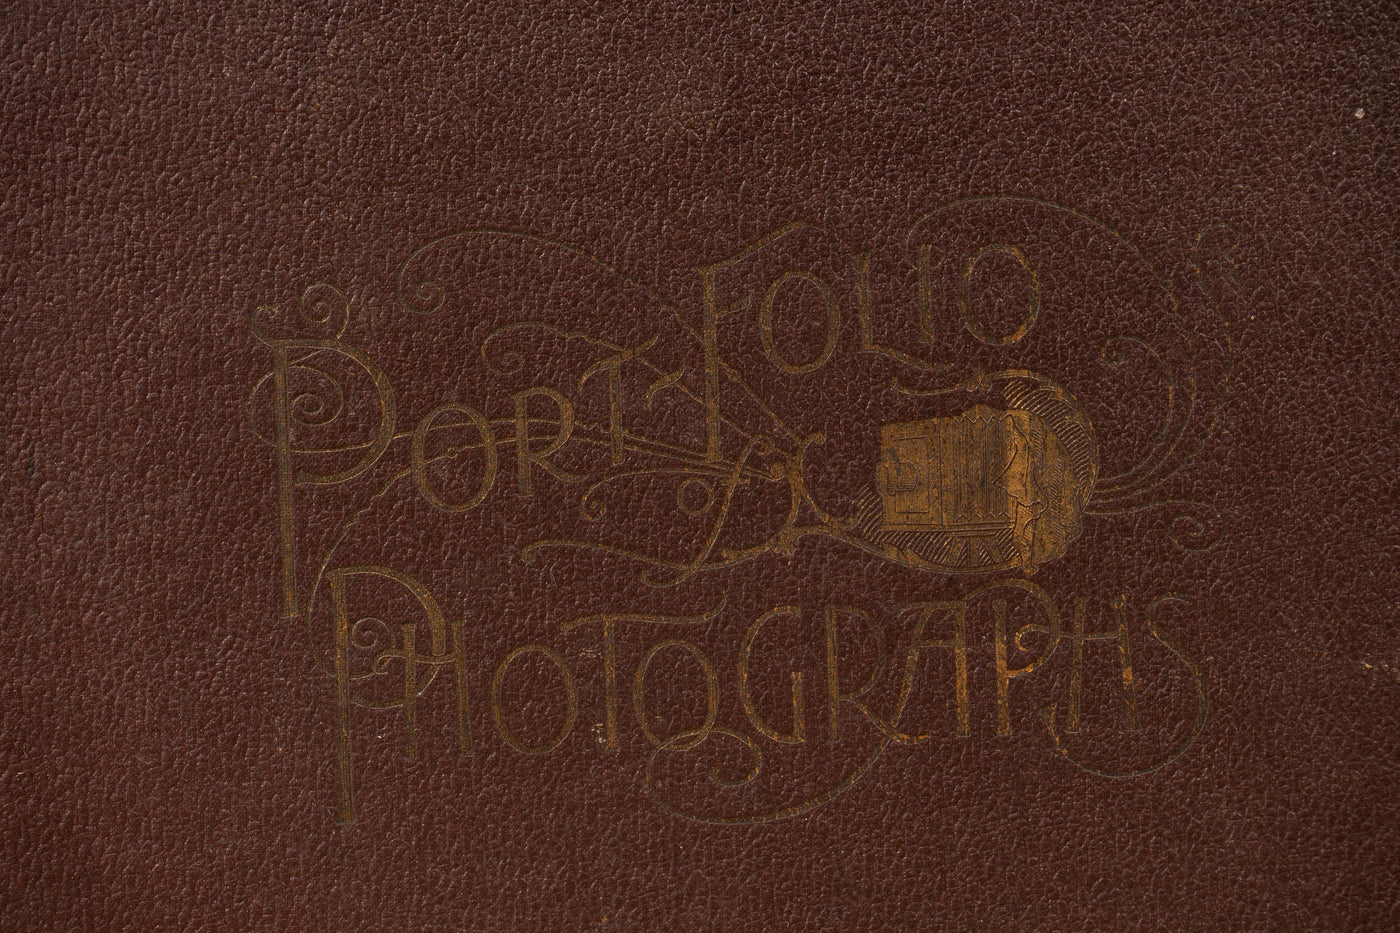 c. 1894 Edition of The Columbian Gallery, A Portfolio of Photographs from the World's Fair